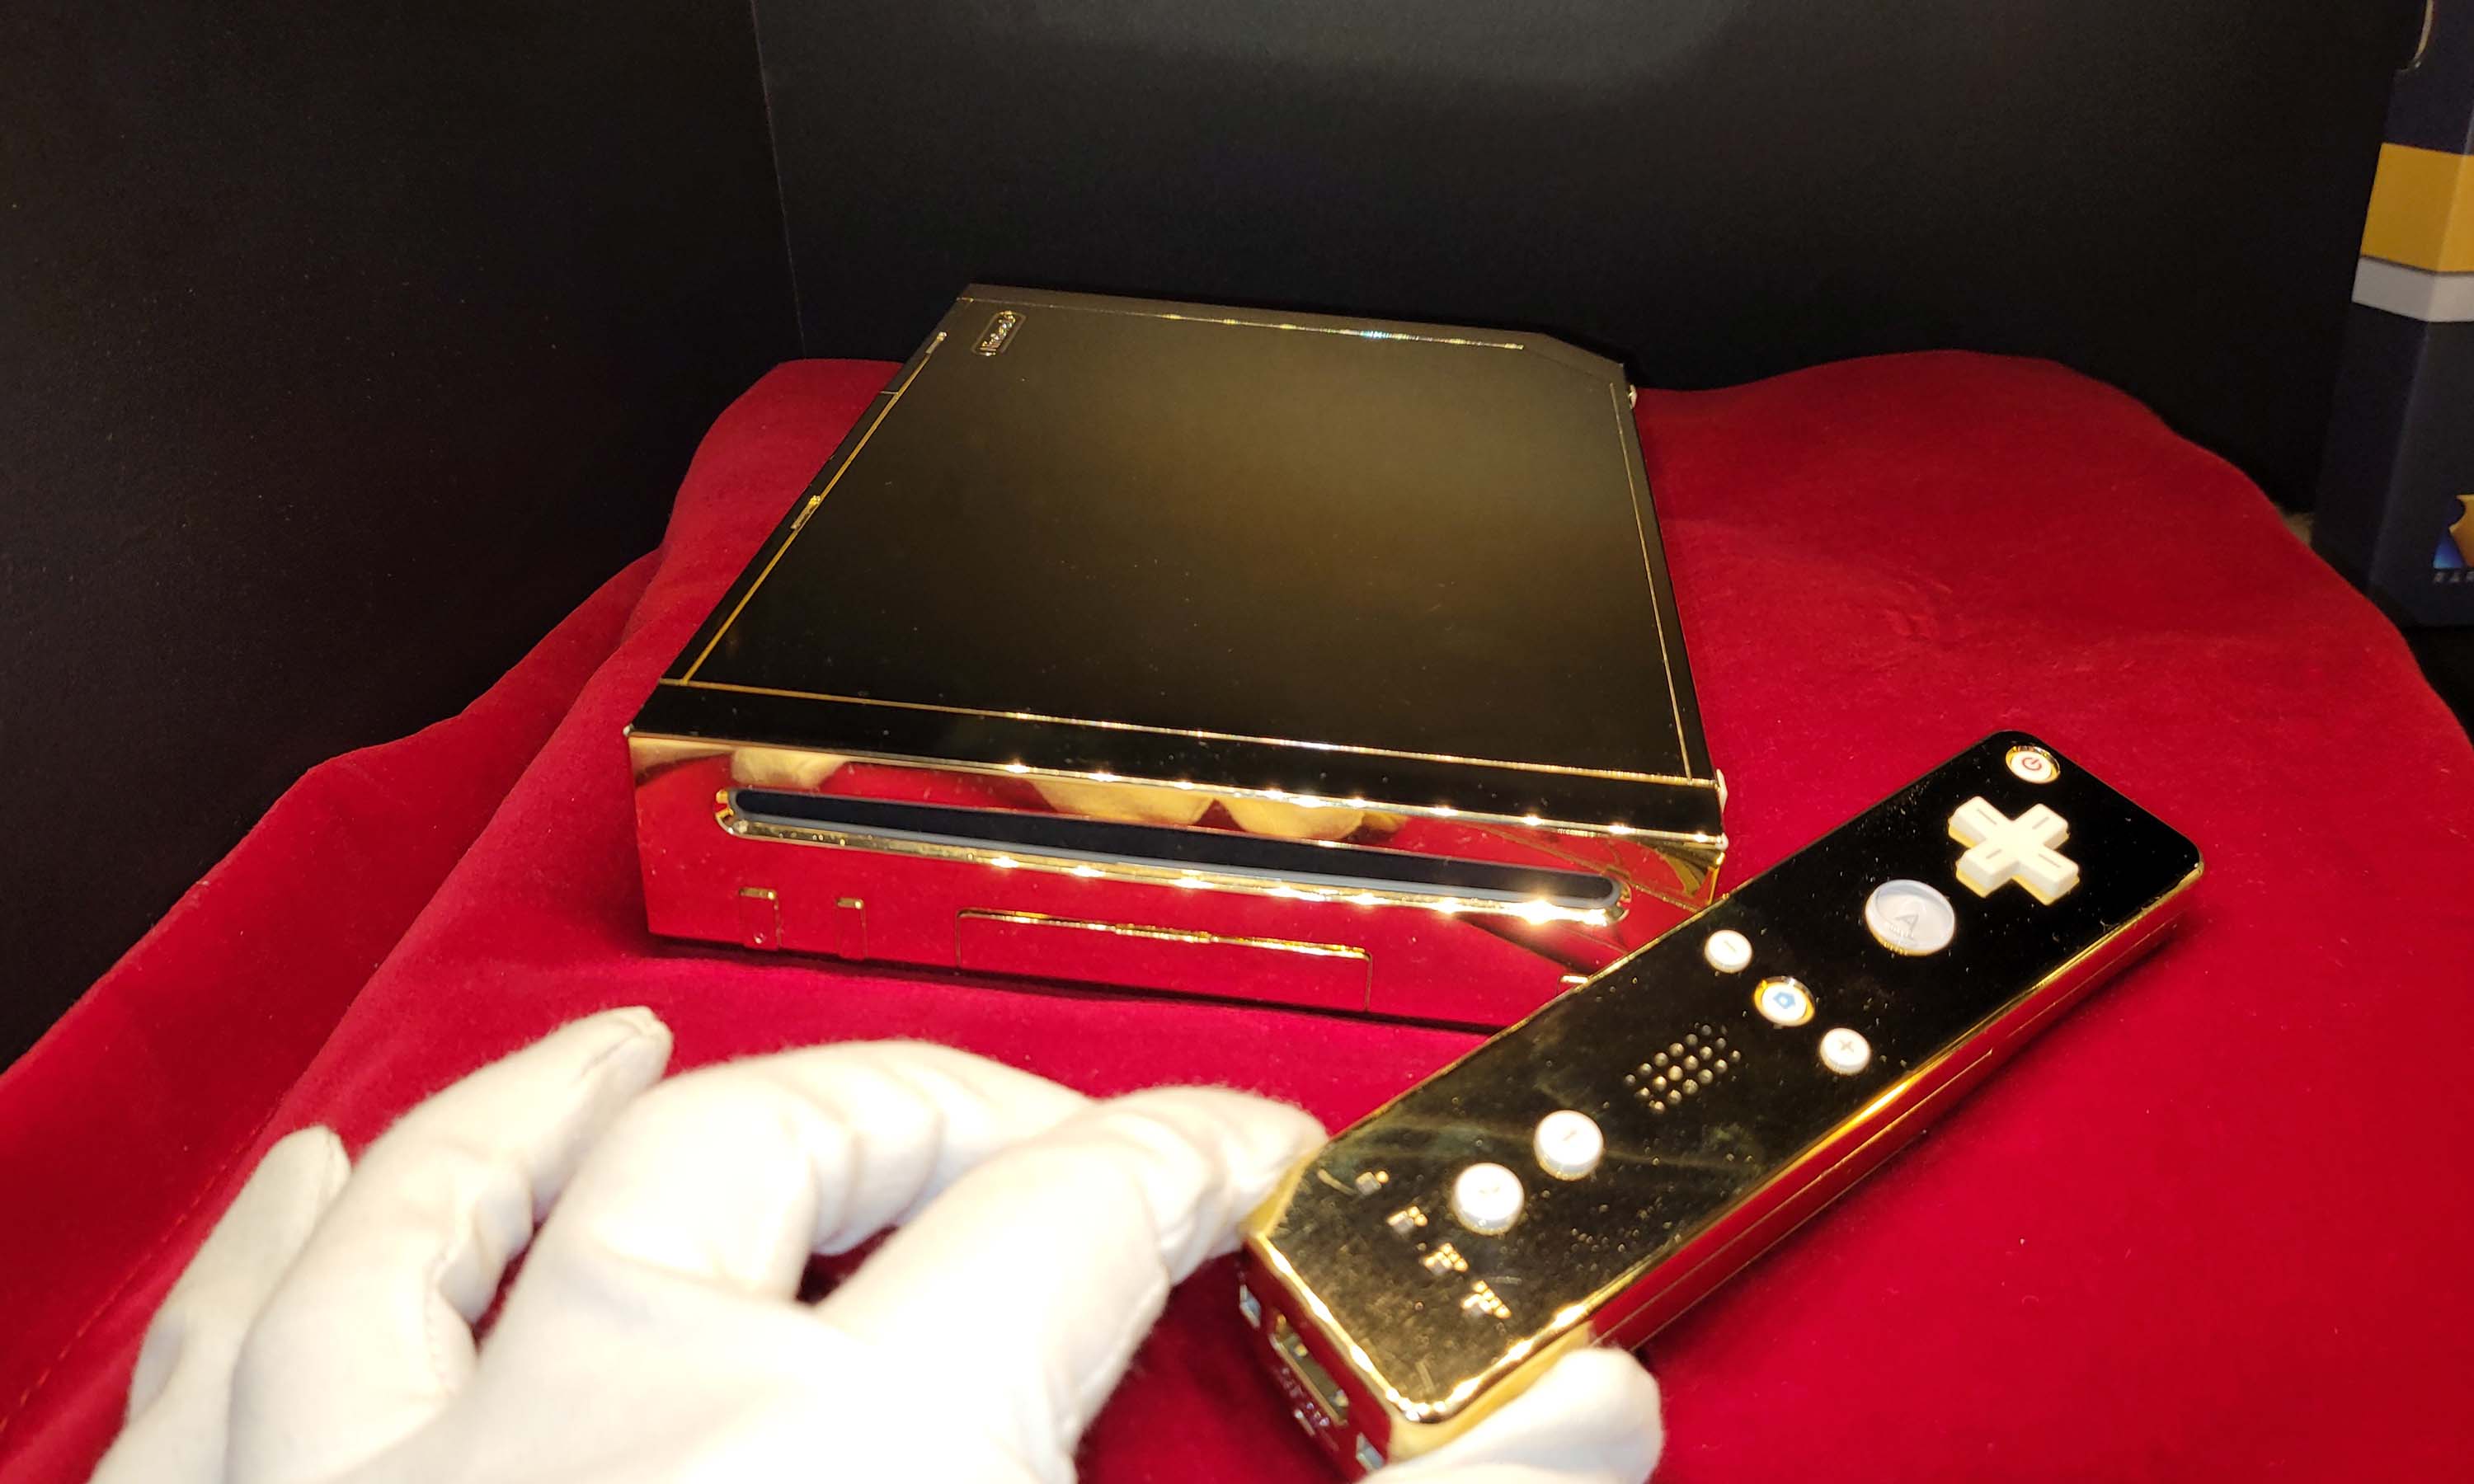 woensdag verlamming realiteit Gold-plated Nintendo Wii made for Queen Elizabeth up for sale - CNN Style